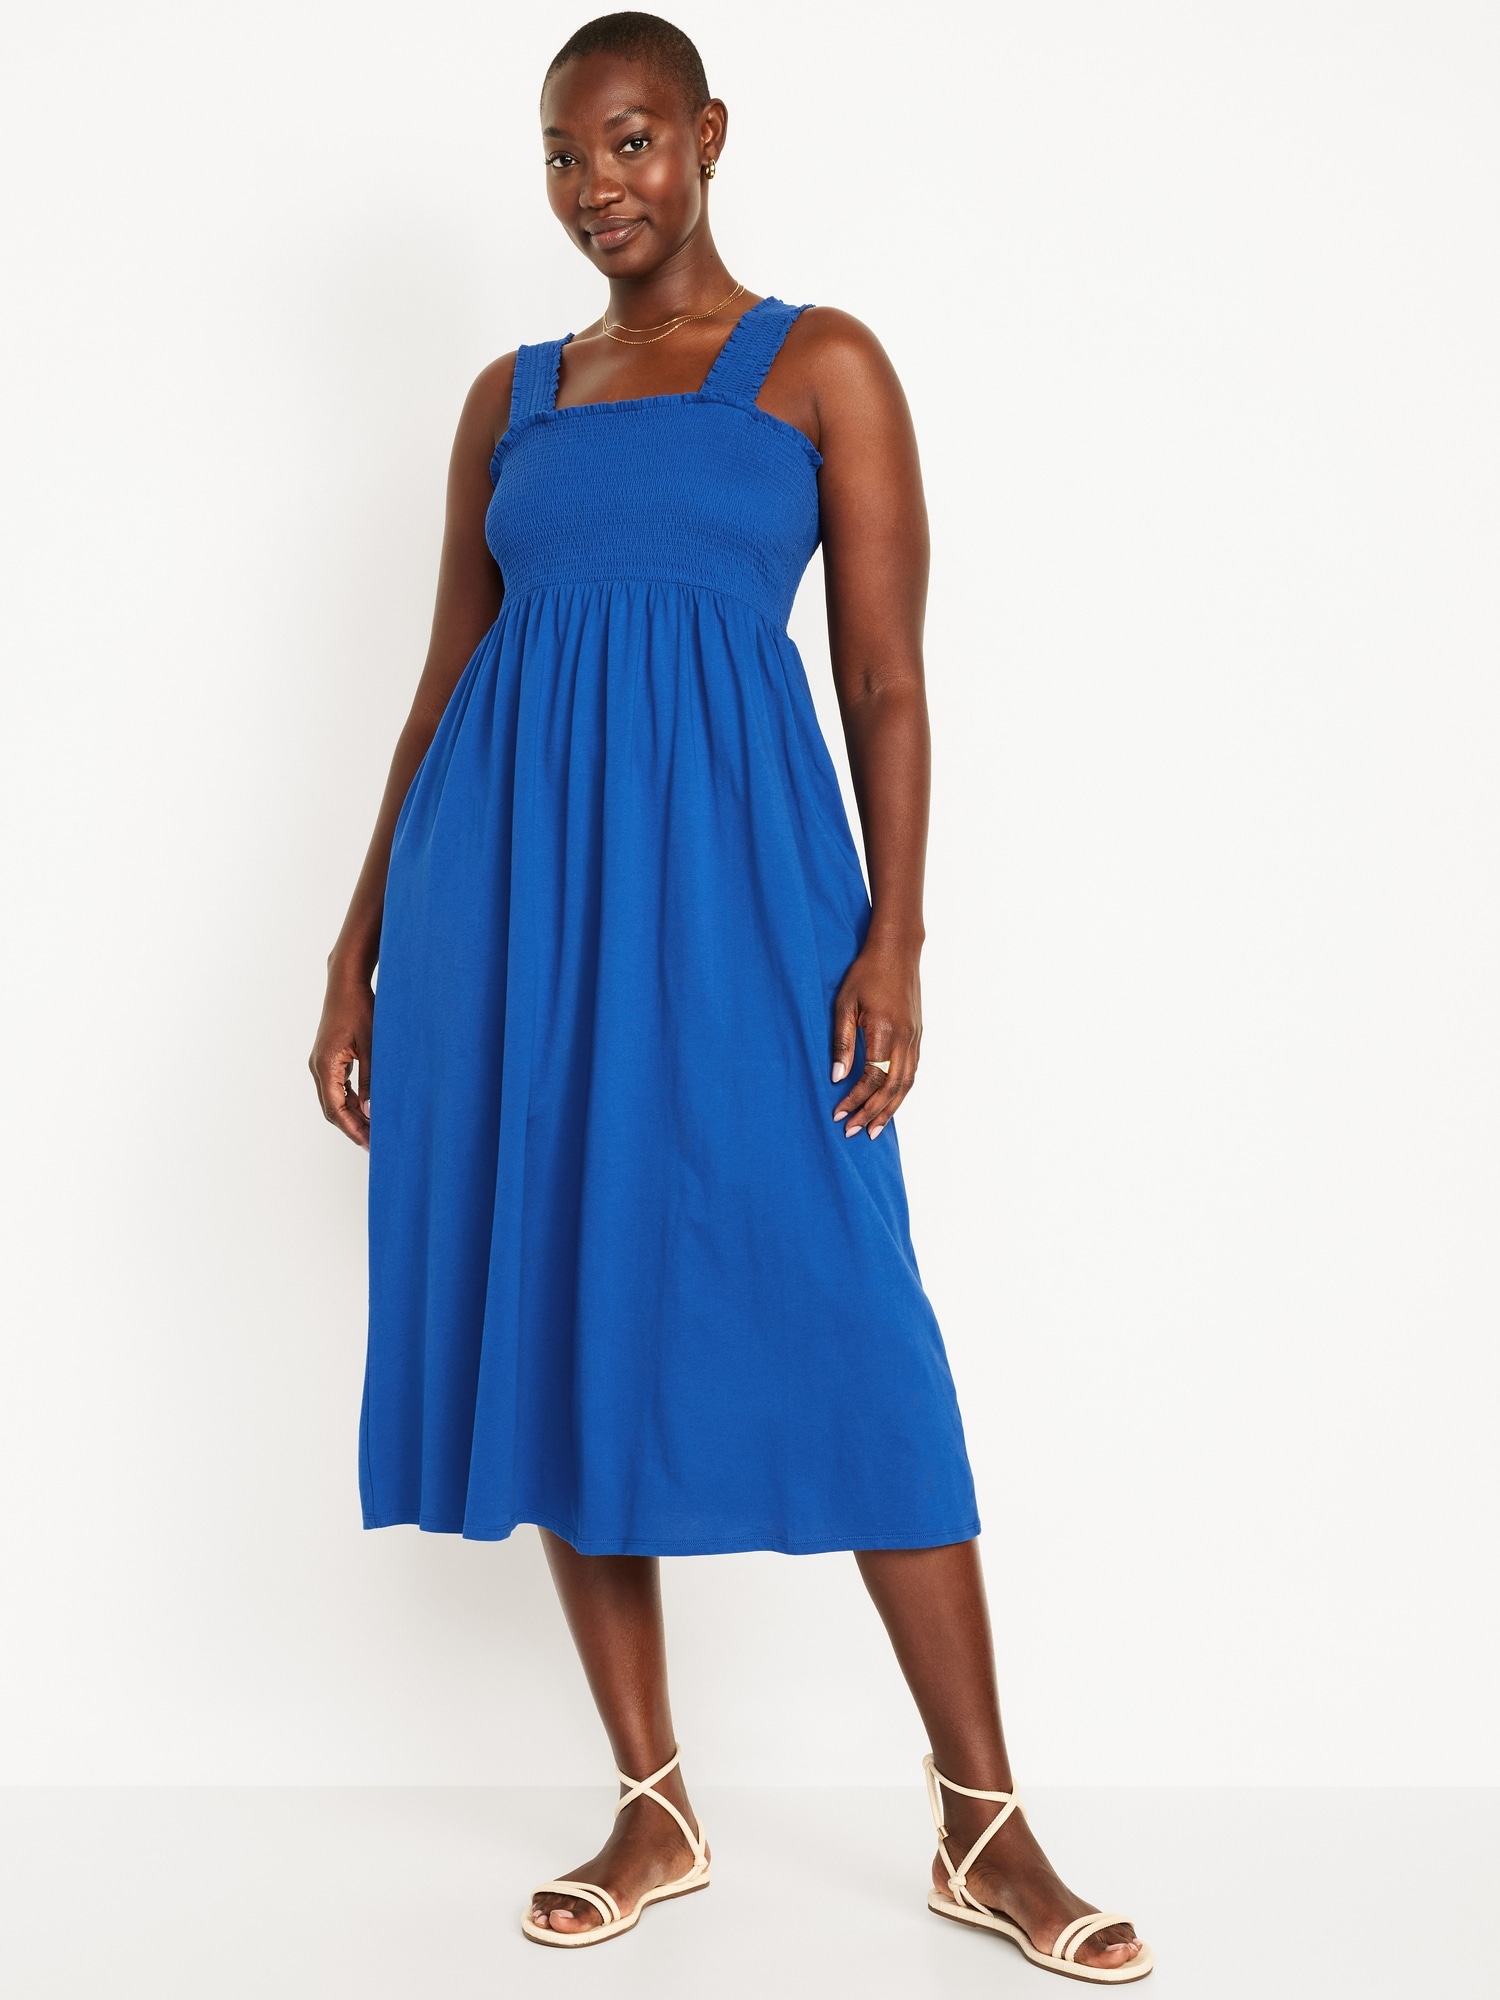 I'm midsize with 38G-cup boobs - I found 7 super flattering dresses on   including a $29 score